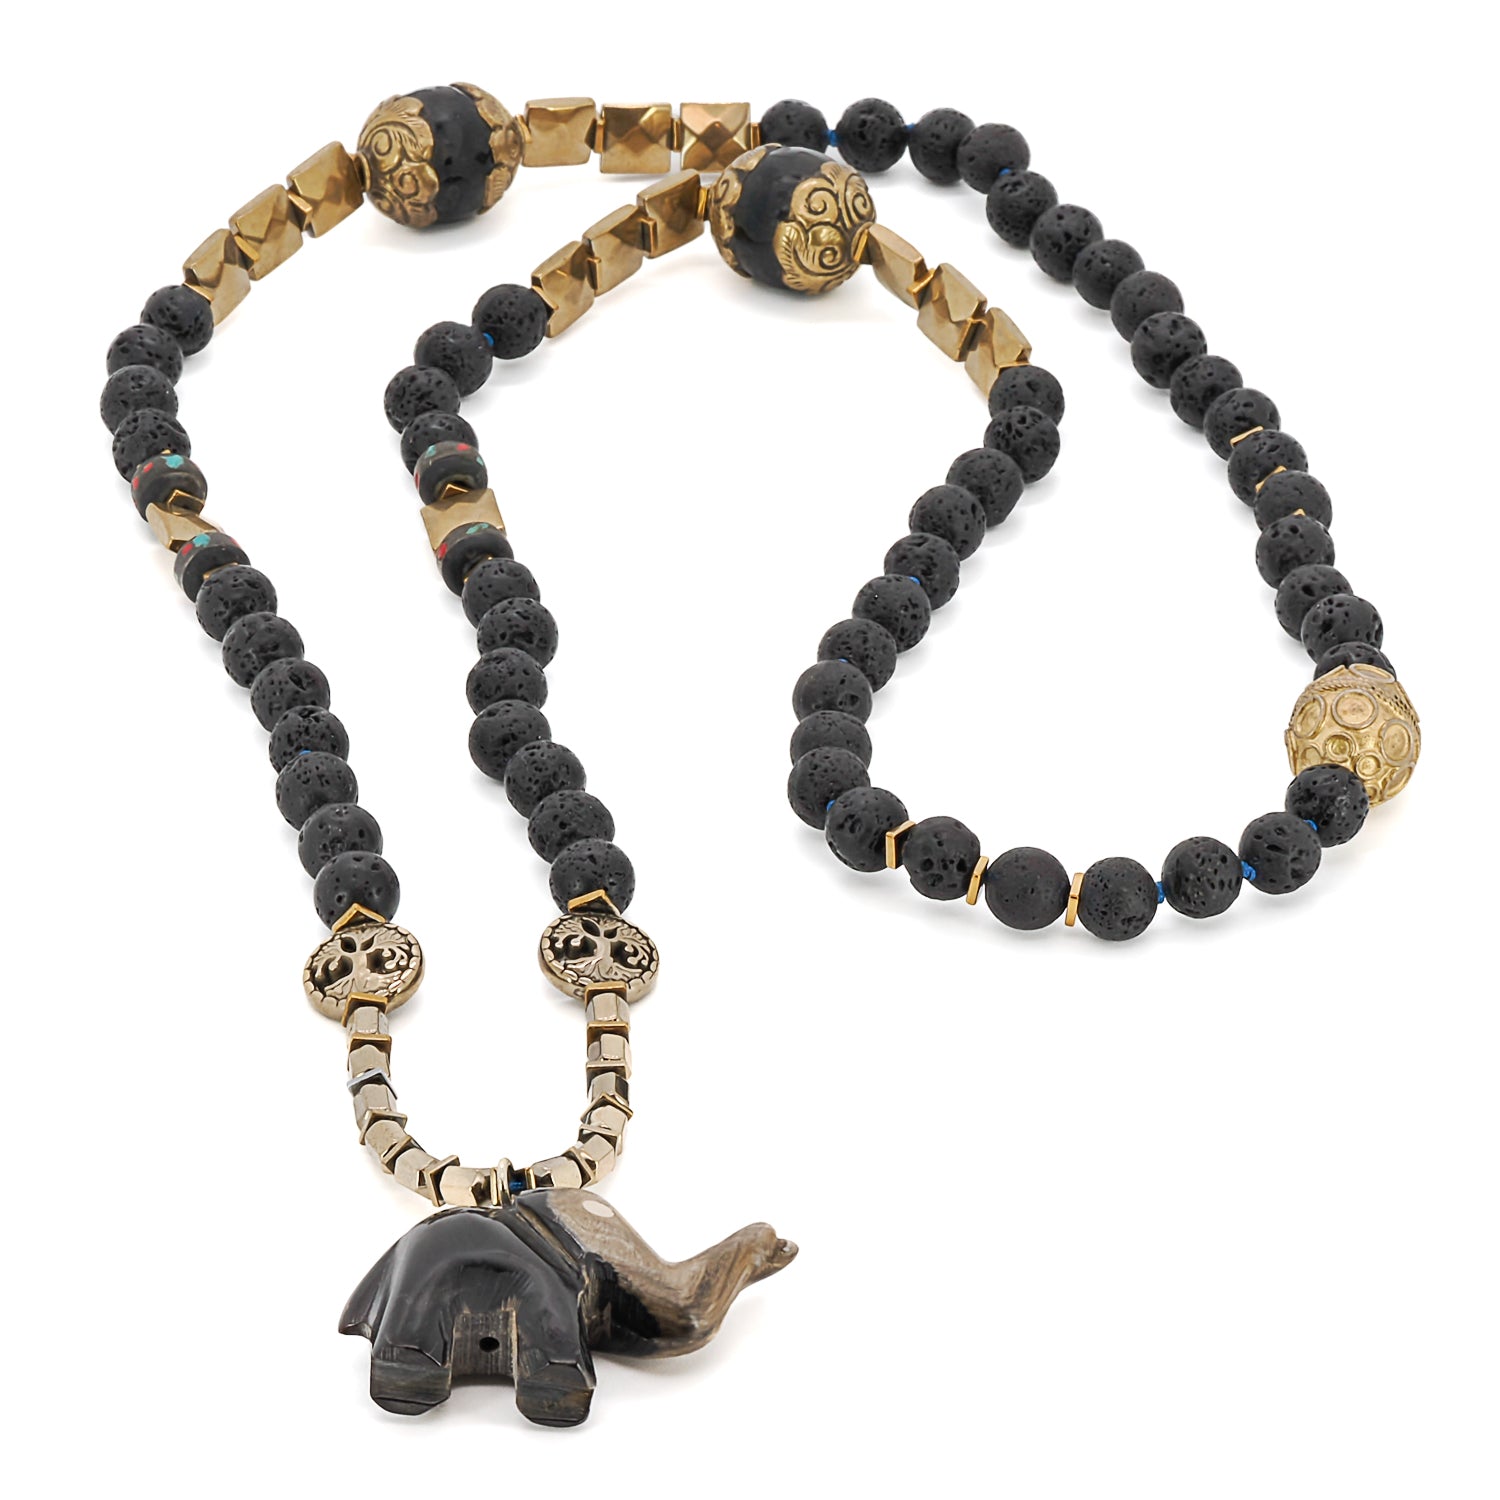 Admire the beauty and symbolism of the Spiritual Nepal Elephant Necklace